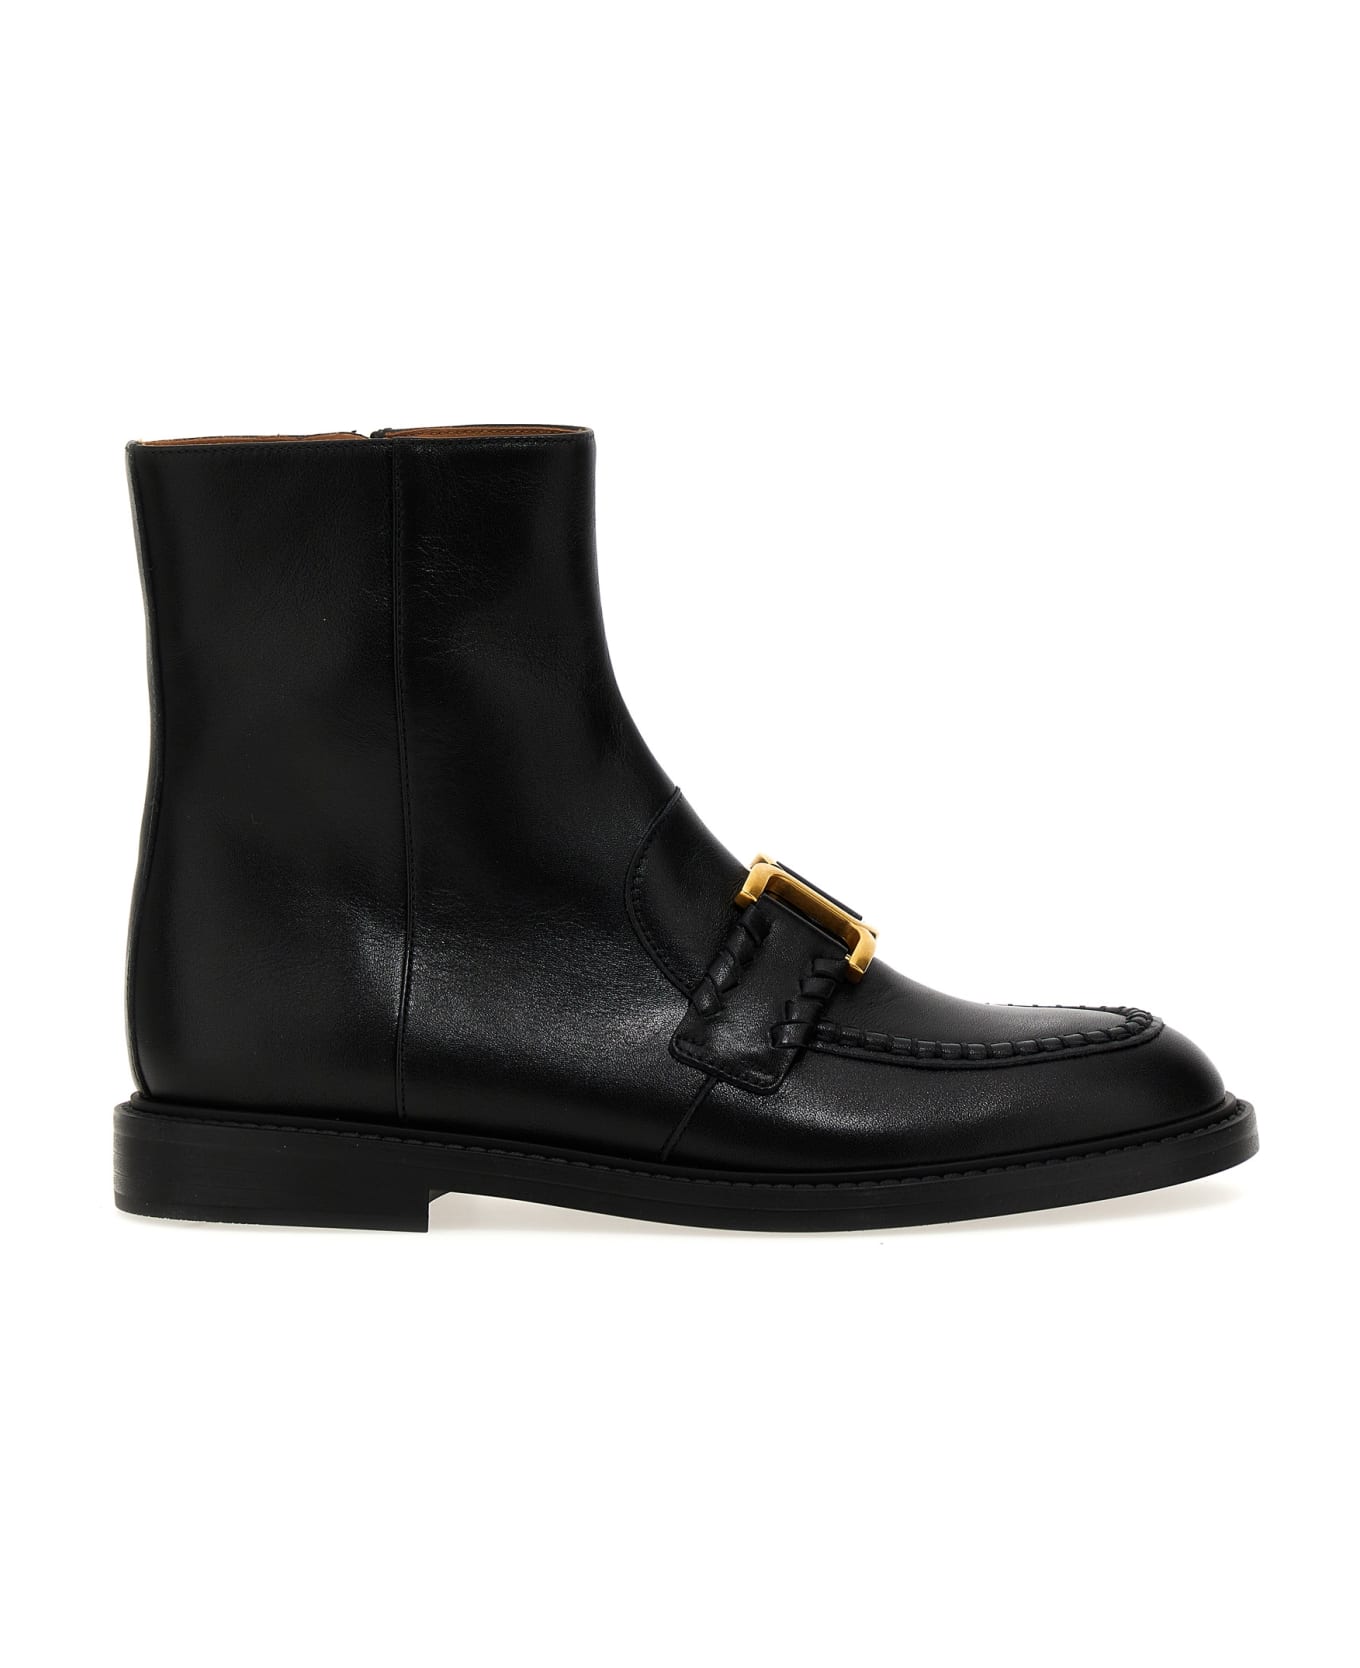 Chloé 'marcie' Ankle Boots | italist